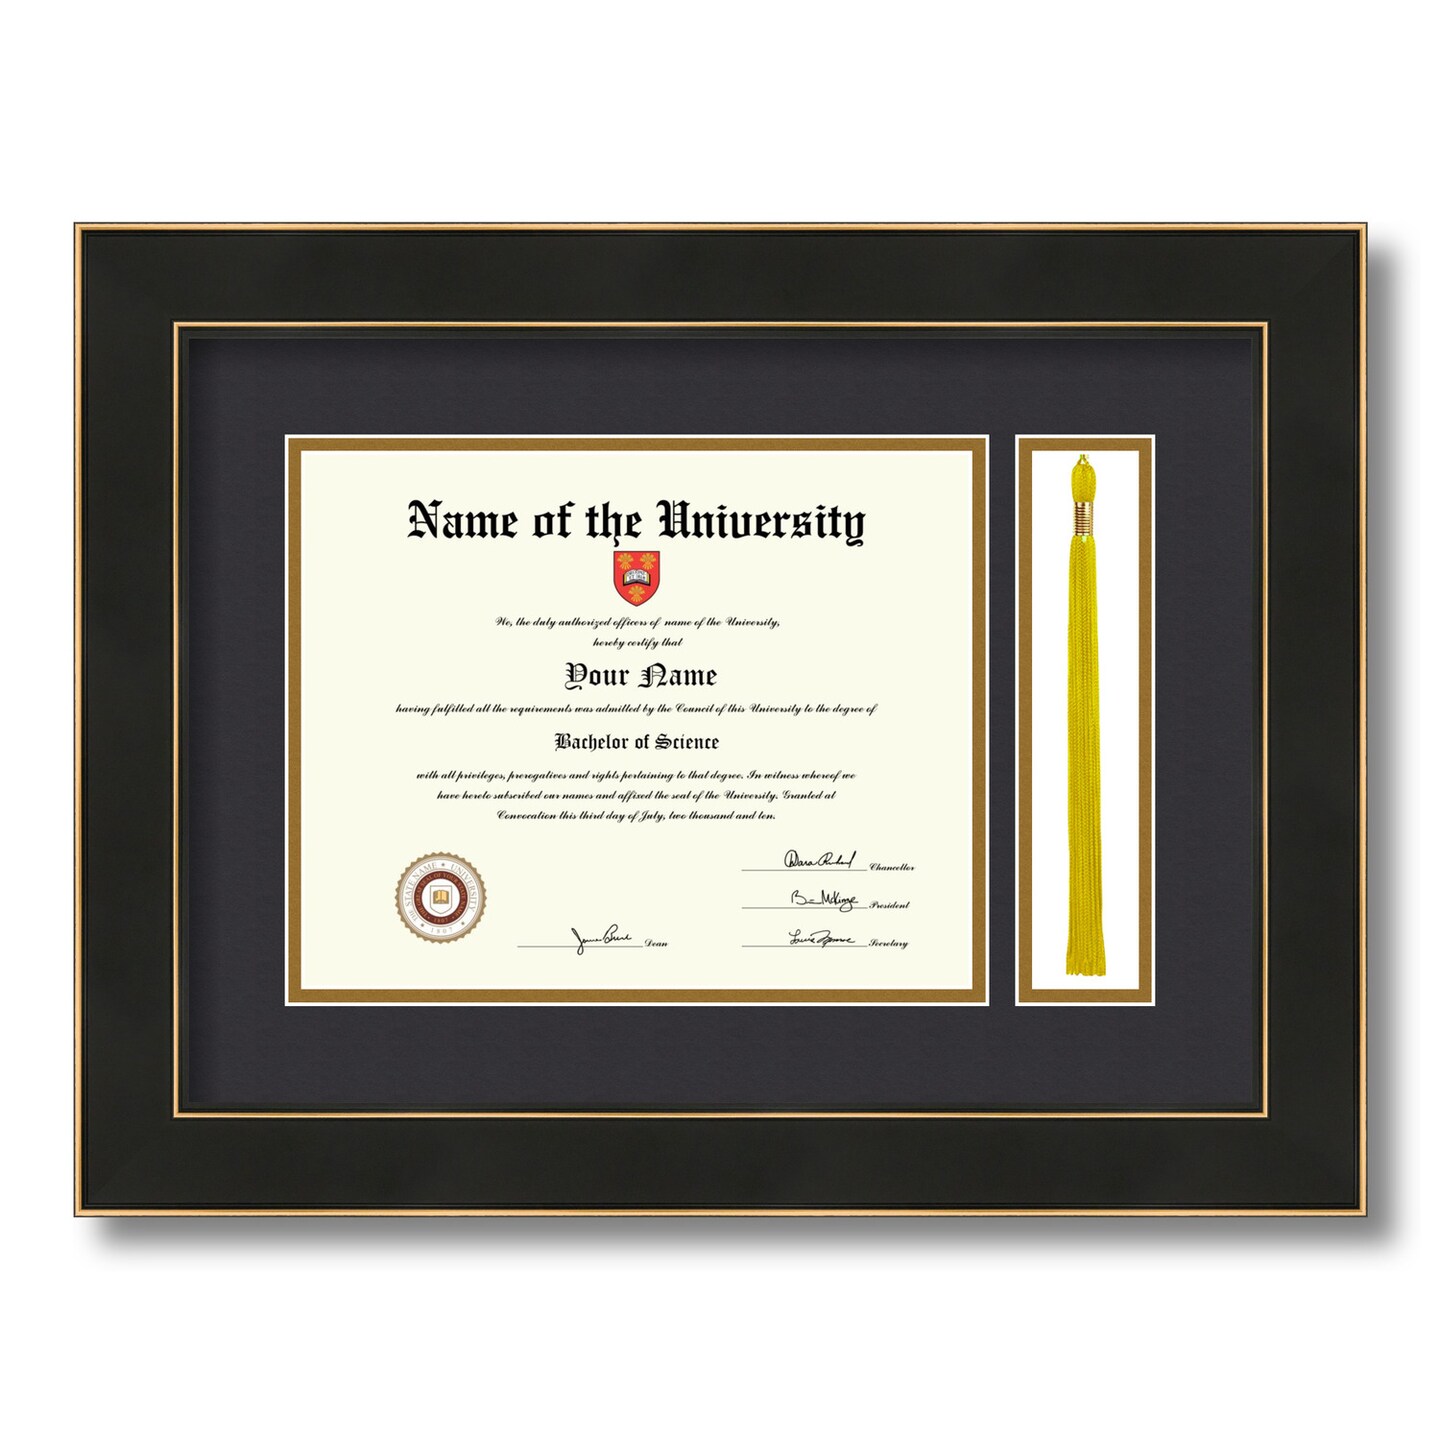 ArtToFrames 8x10 inch Diploma Frame with Tassel Opening - Framed with Black and Gold Mats, Comes with Regular Glass and Sawtooth Hanger for Wall Hanging (DT-8x10)